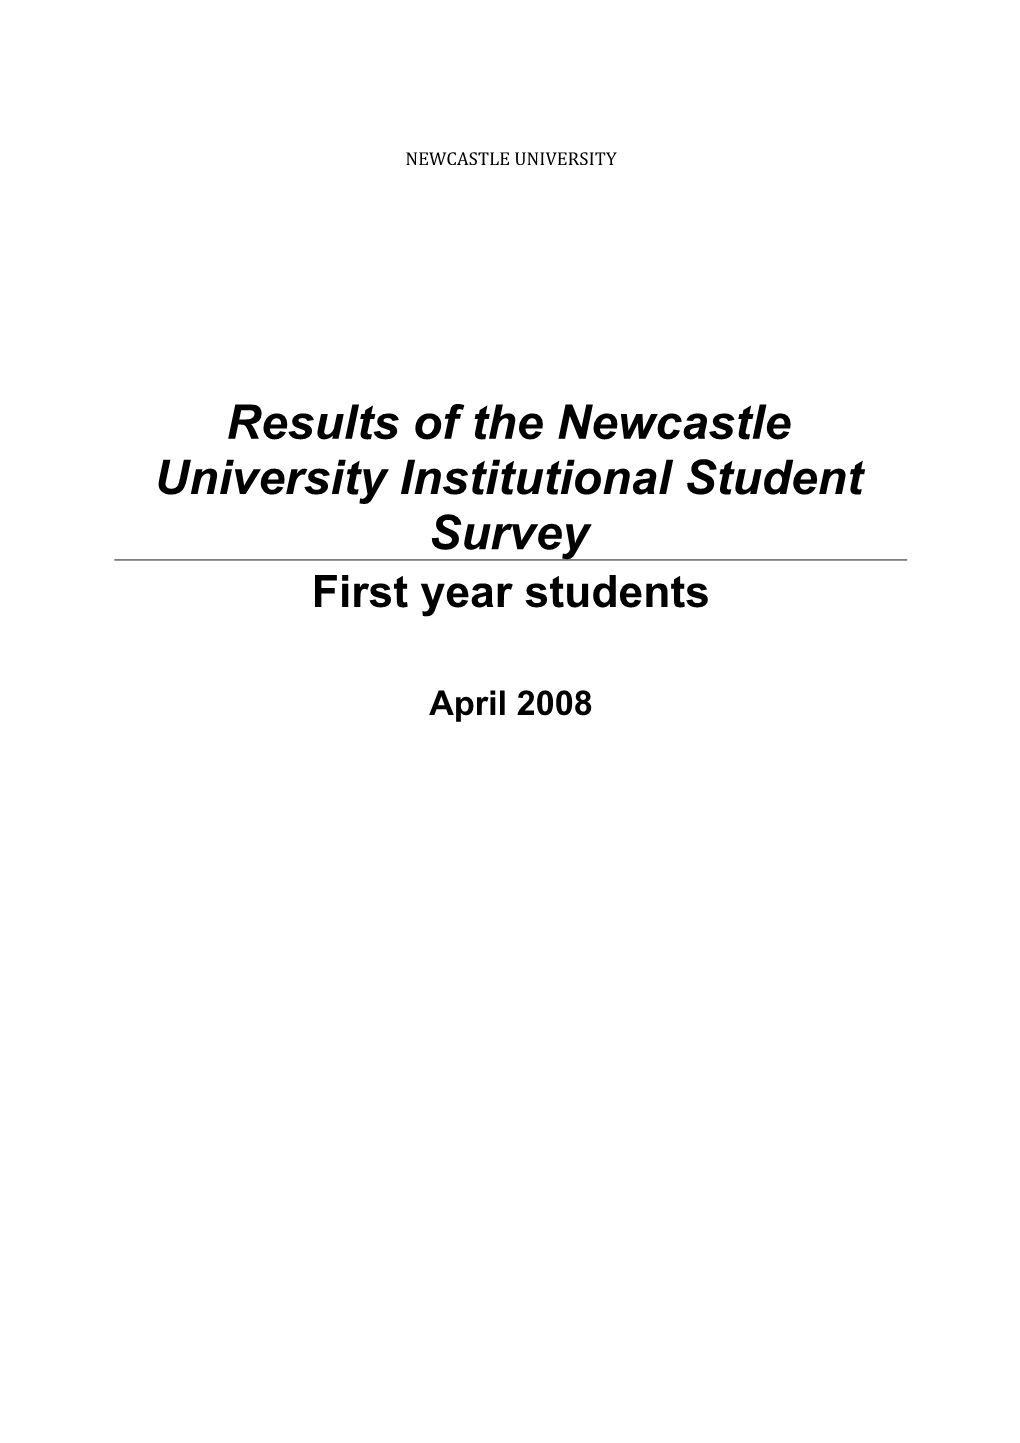 Results of the Newcastle University Institutional Student Survey